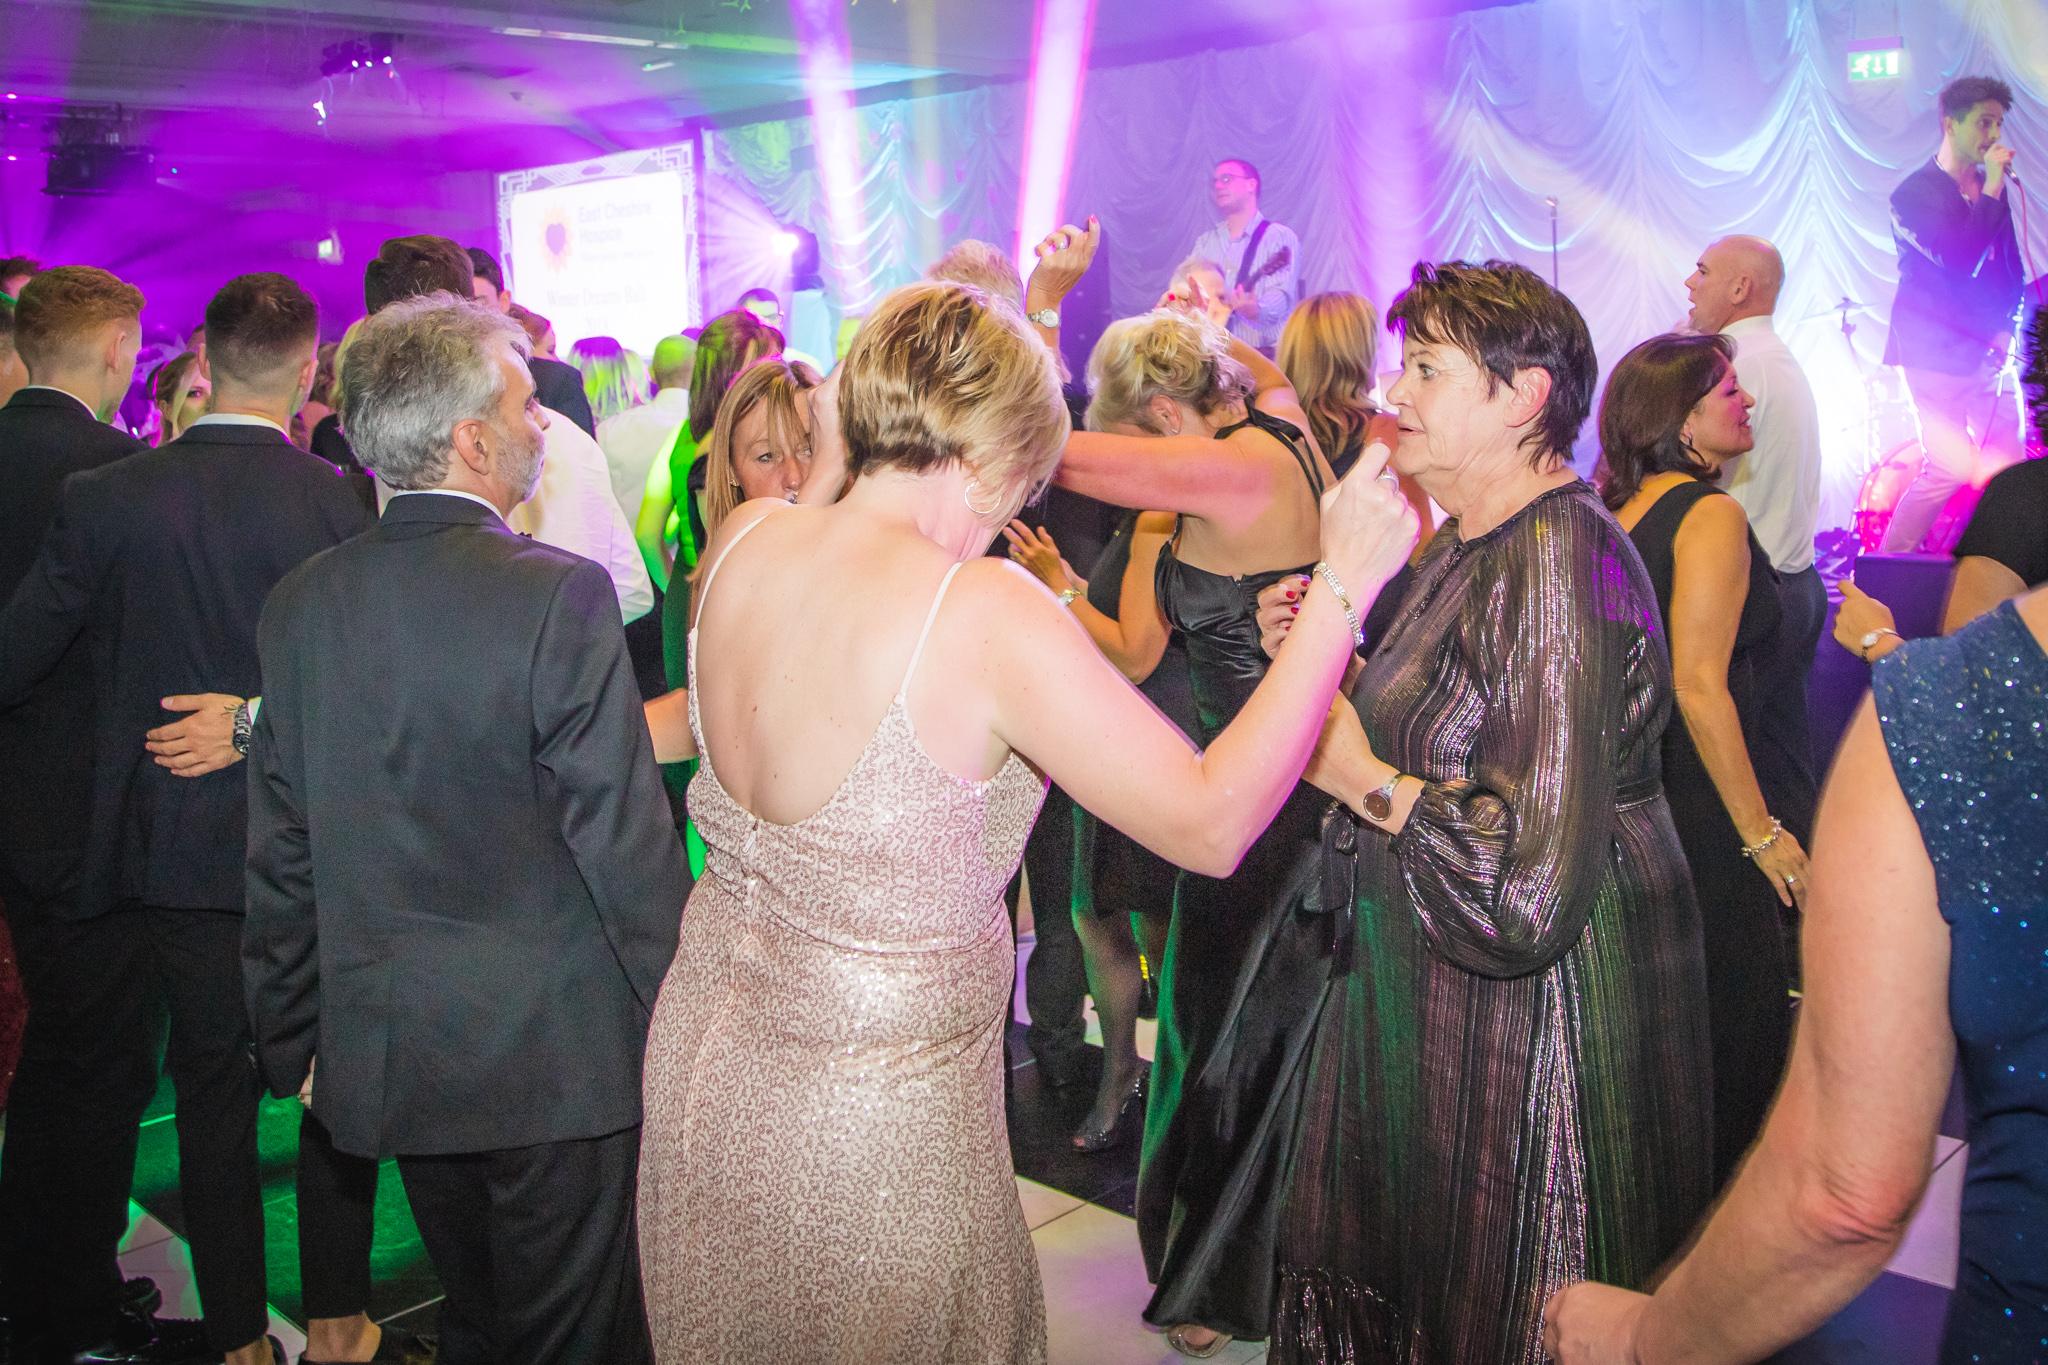 Winter Ball is back for 2022! East Cheshire Hospice